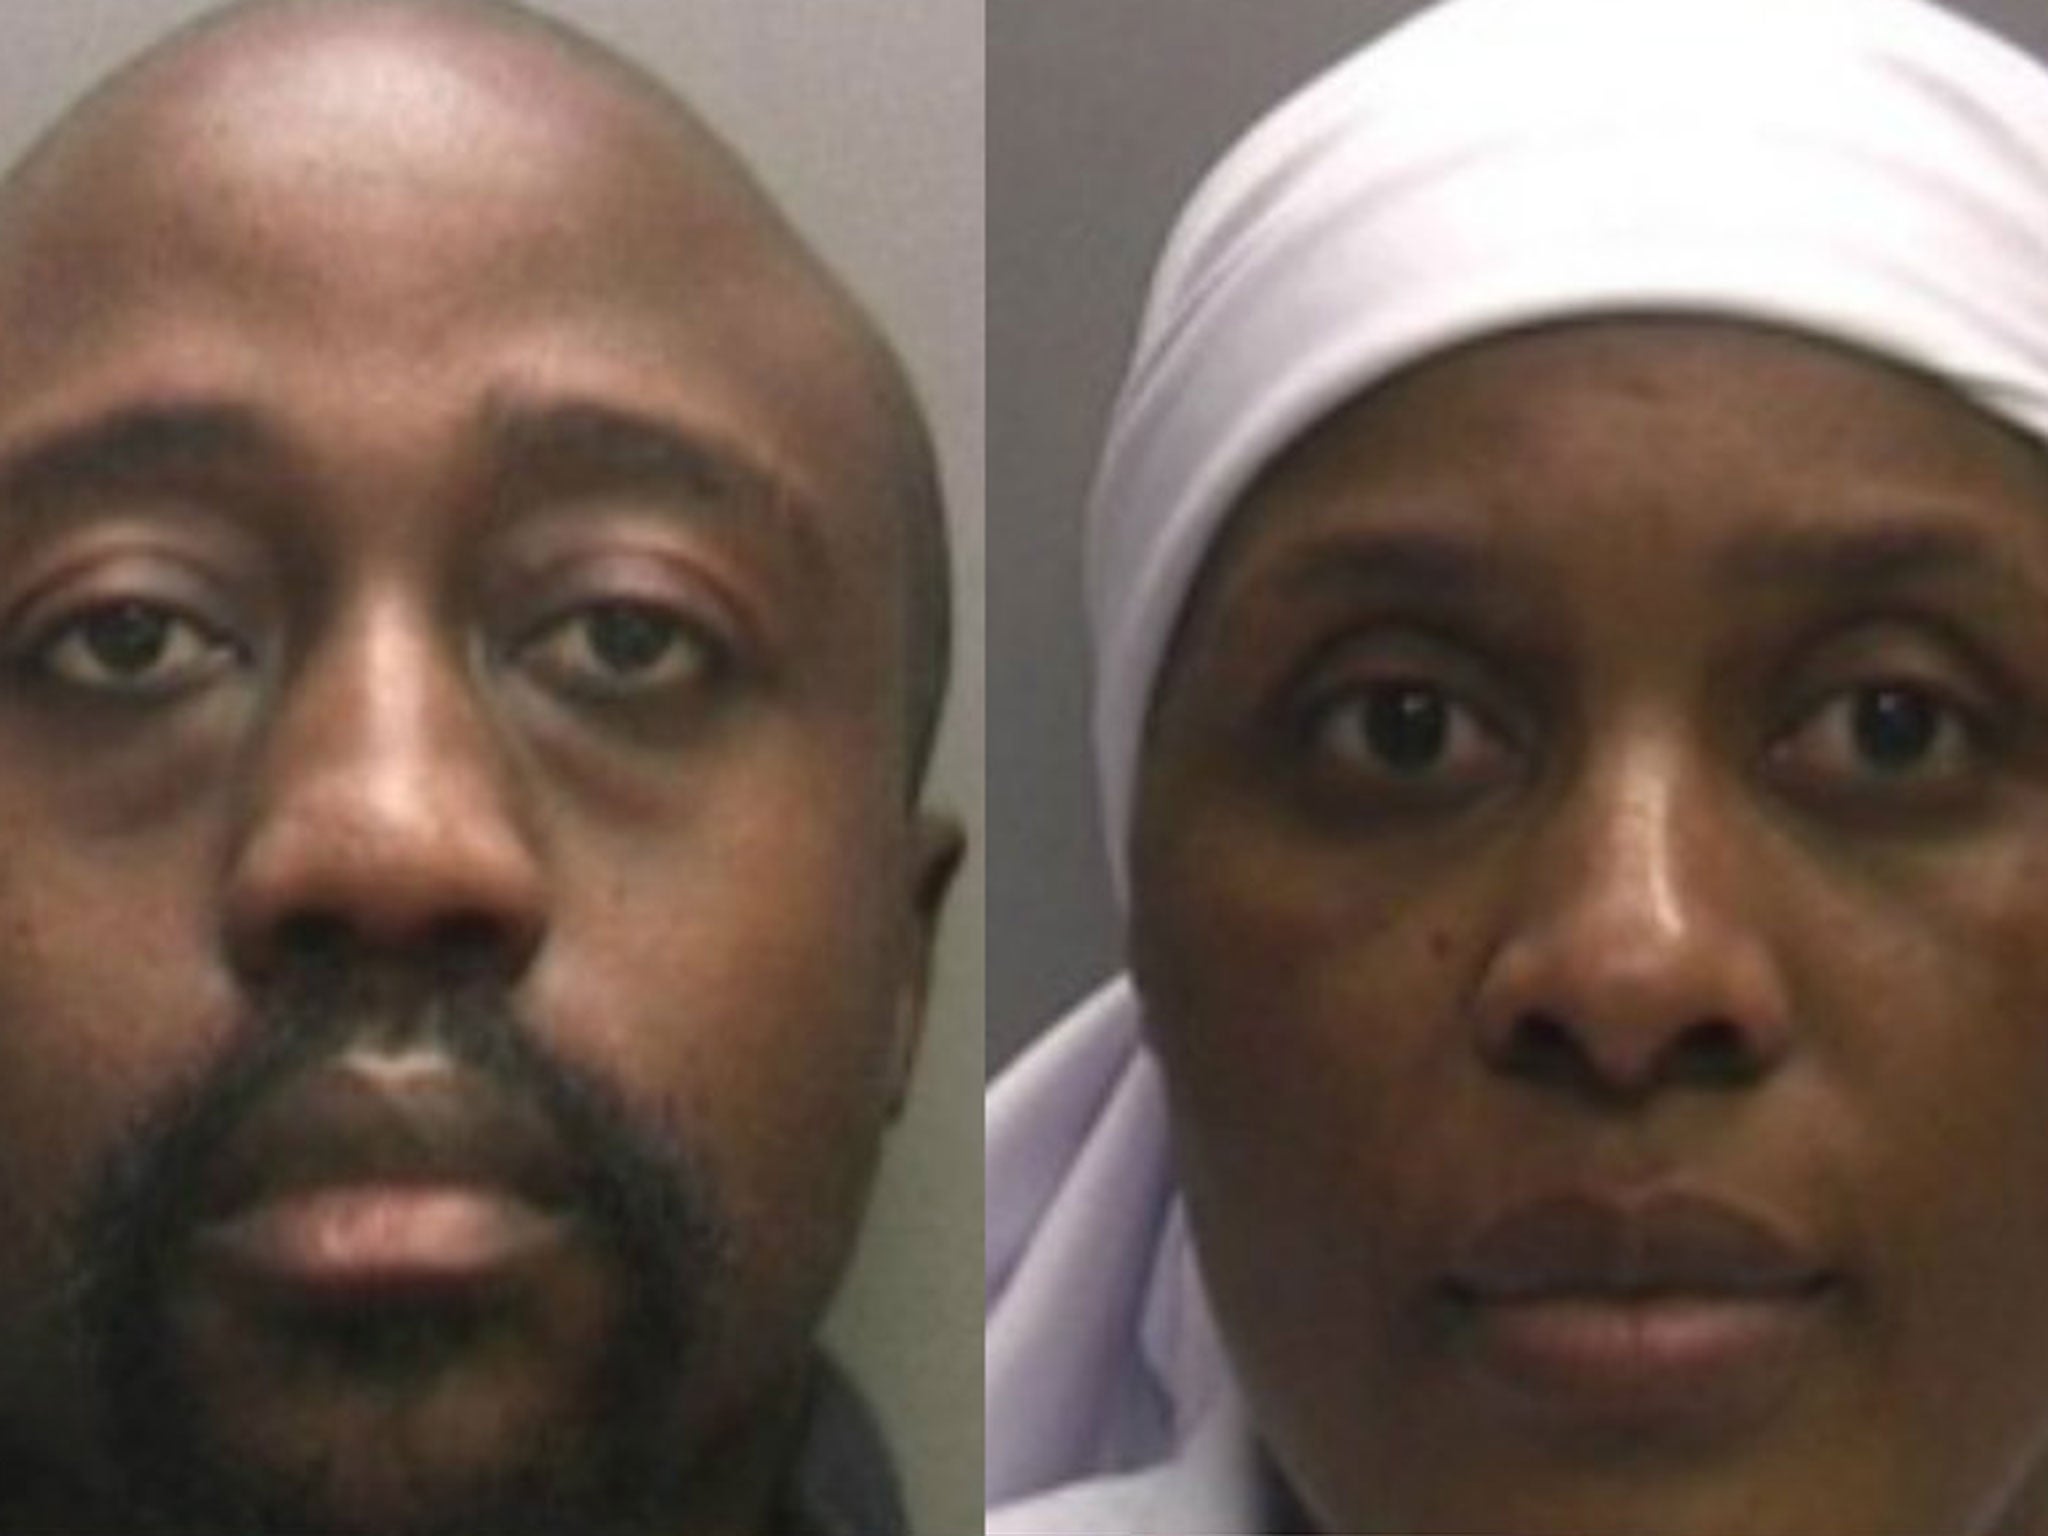 Brian and Precious Kandare admitted to manslaughter